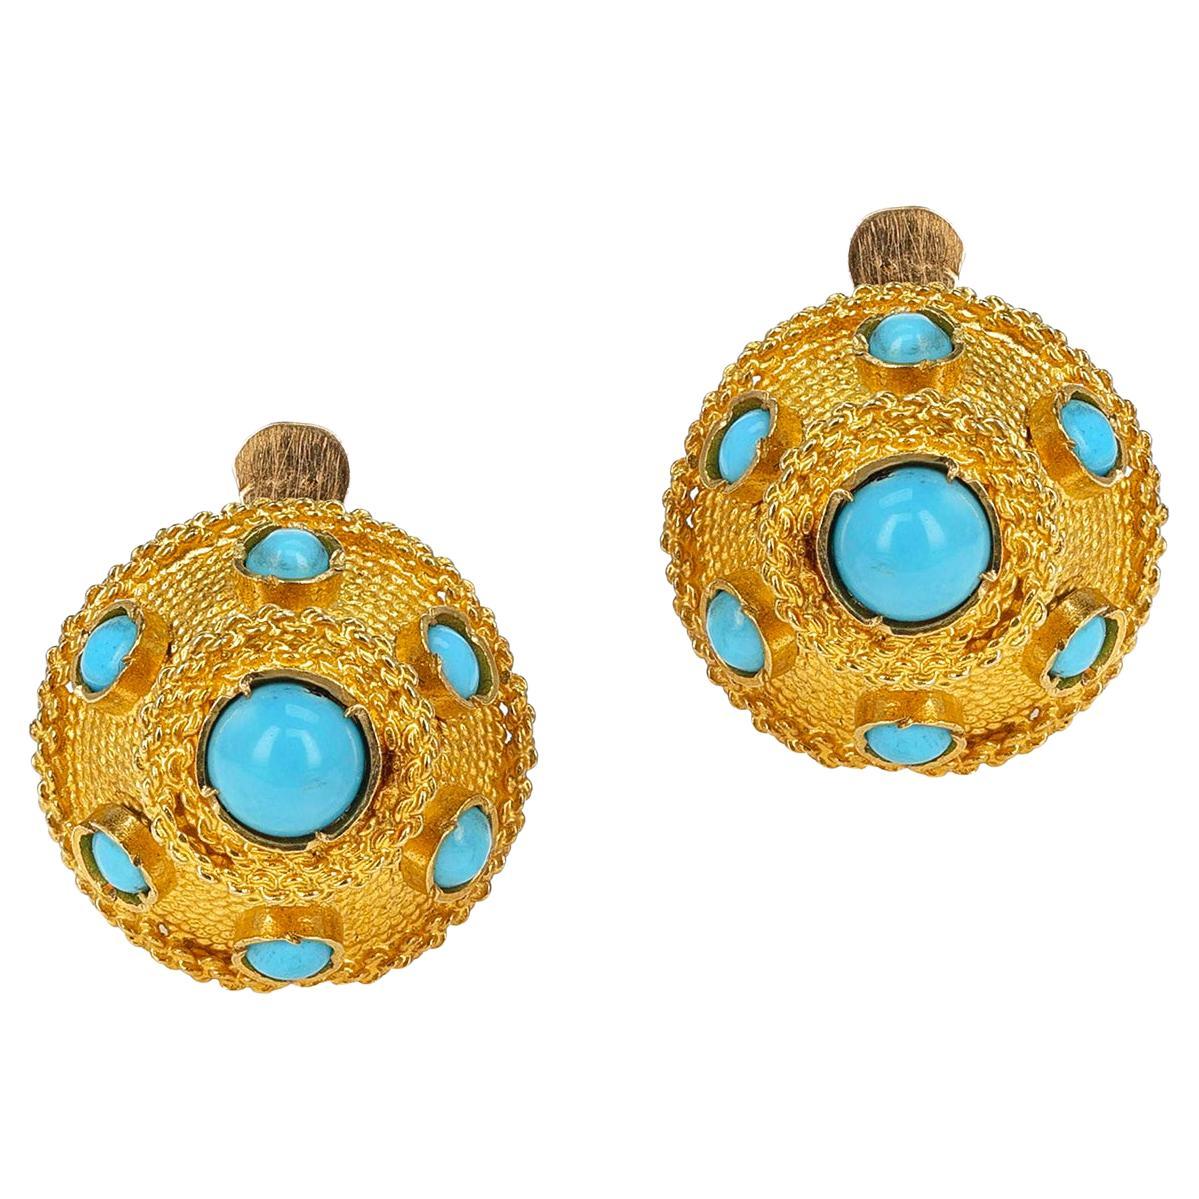 Antique Gold and Turquoise Earrings For Sale at 1stDibs